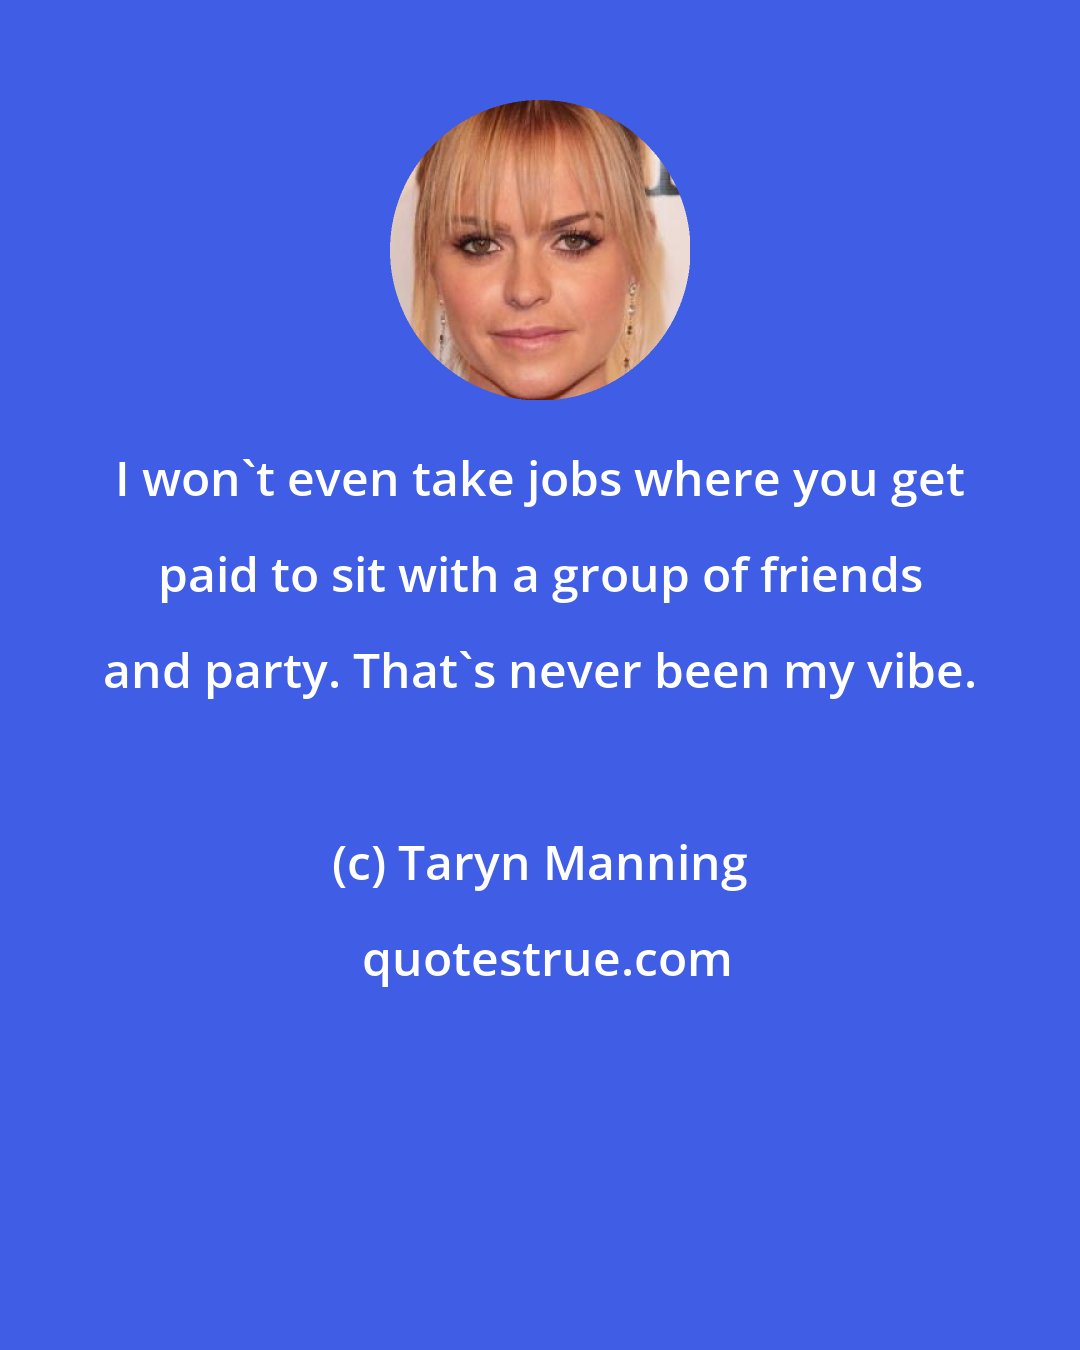 Taryn Manning: I won't even take jobs where you get paid to sit with a group of friends and party. That's never been my vibe.